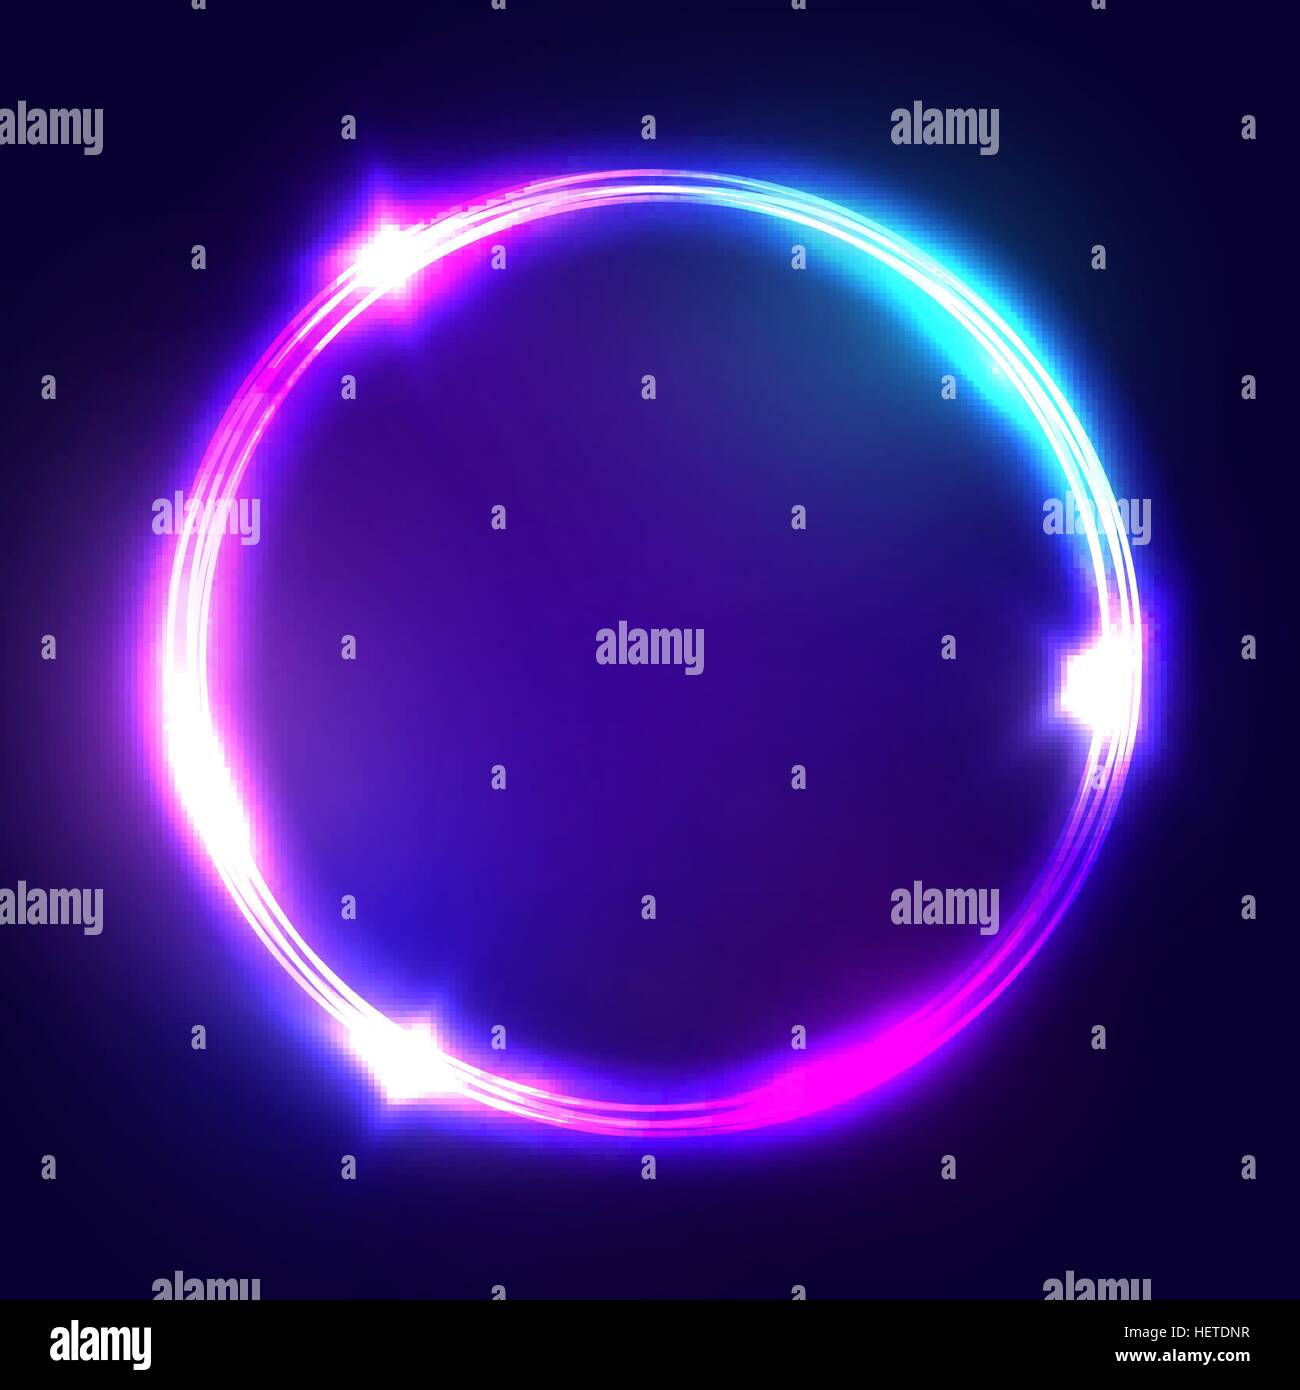 Neon sign. Round frame with glowing and light. Electric bright 3d circuit banner design on dark blue backdrop. Neon abstract circle background with flares and sparkles. Vintage vector illustration. Stock Vector